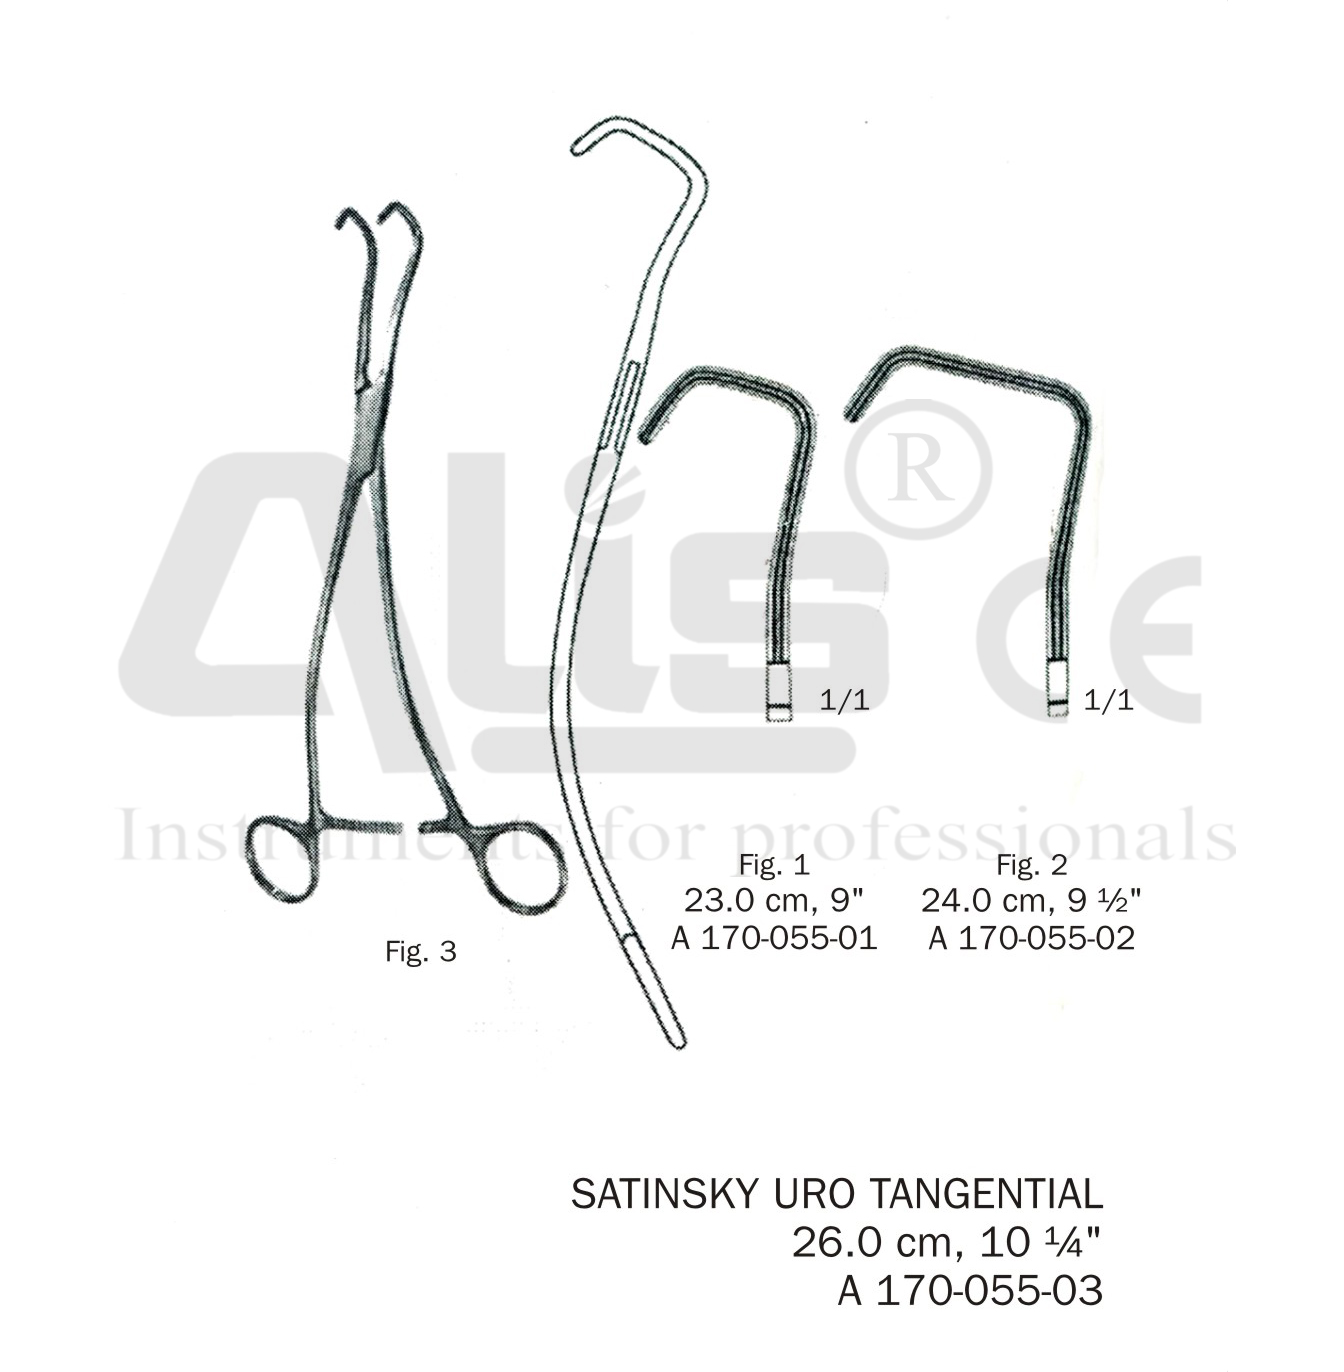 Satinsky Uro Tangential gall duct kidney pedicle clamps